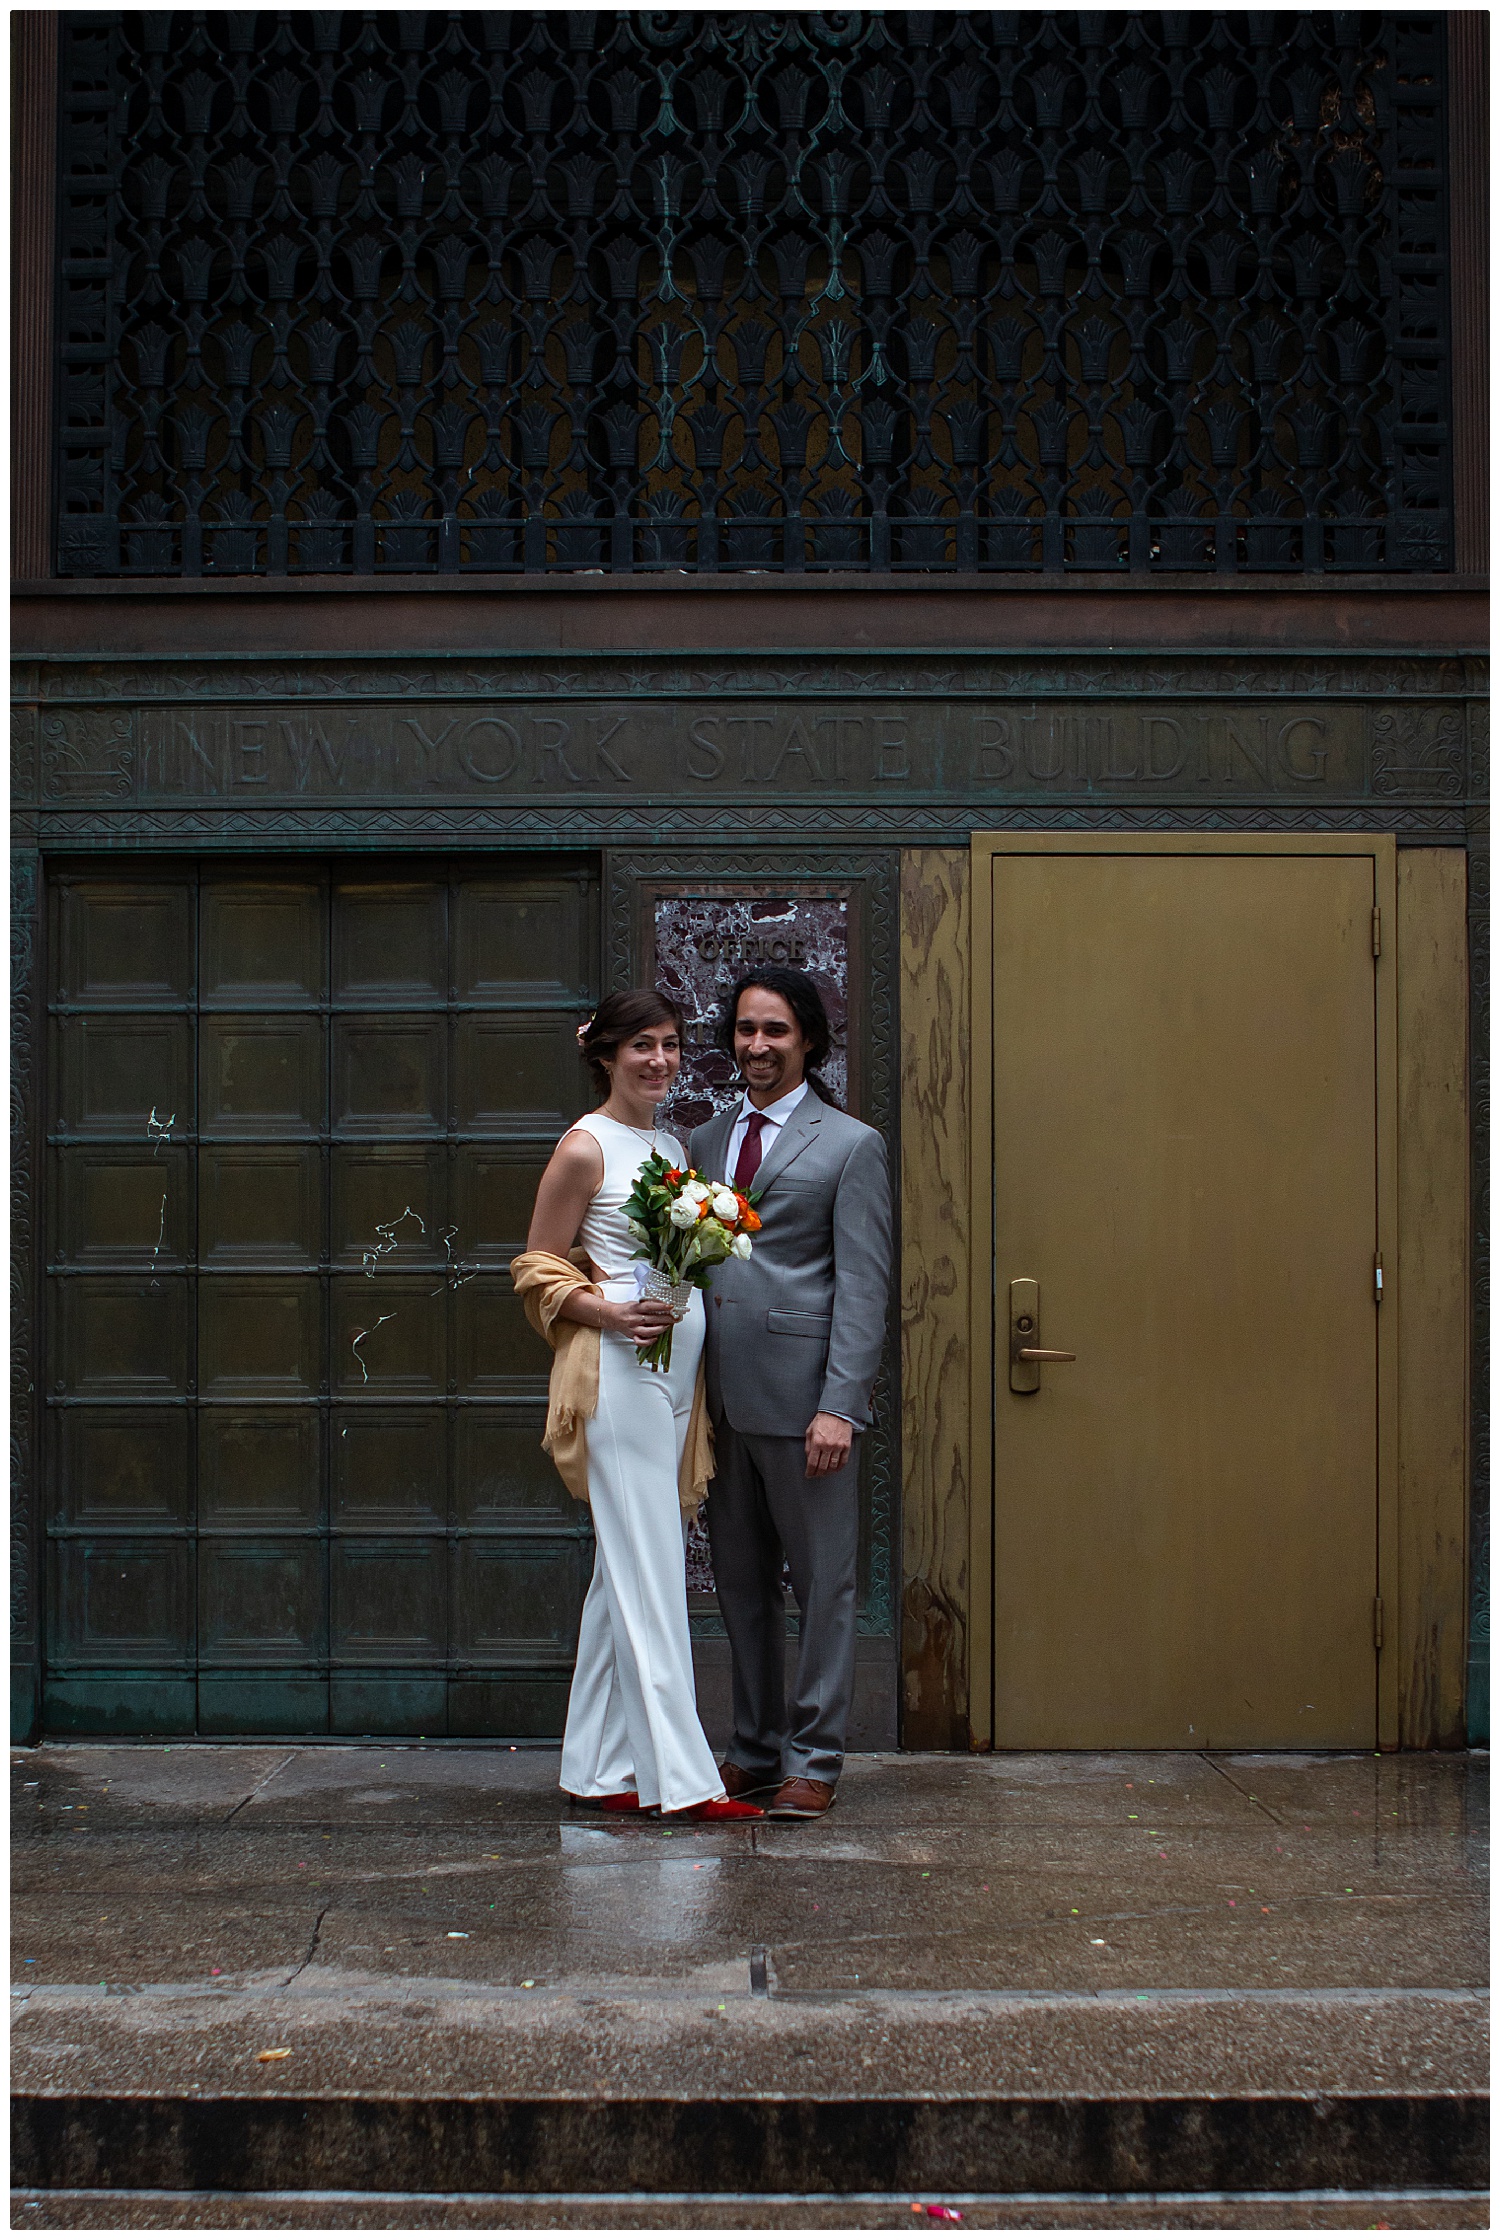 Kate-Alison-Photography-NYC-City-Hall-Courthouse-Elopement_0015.jpg